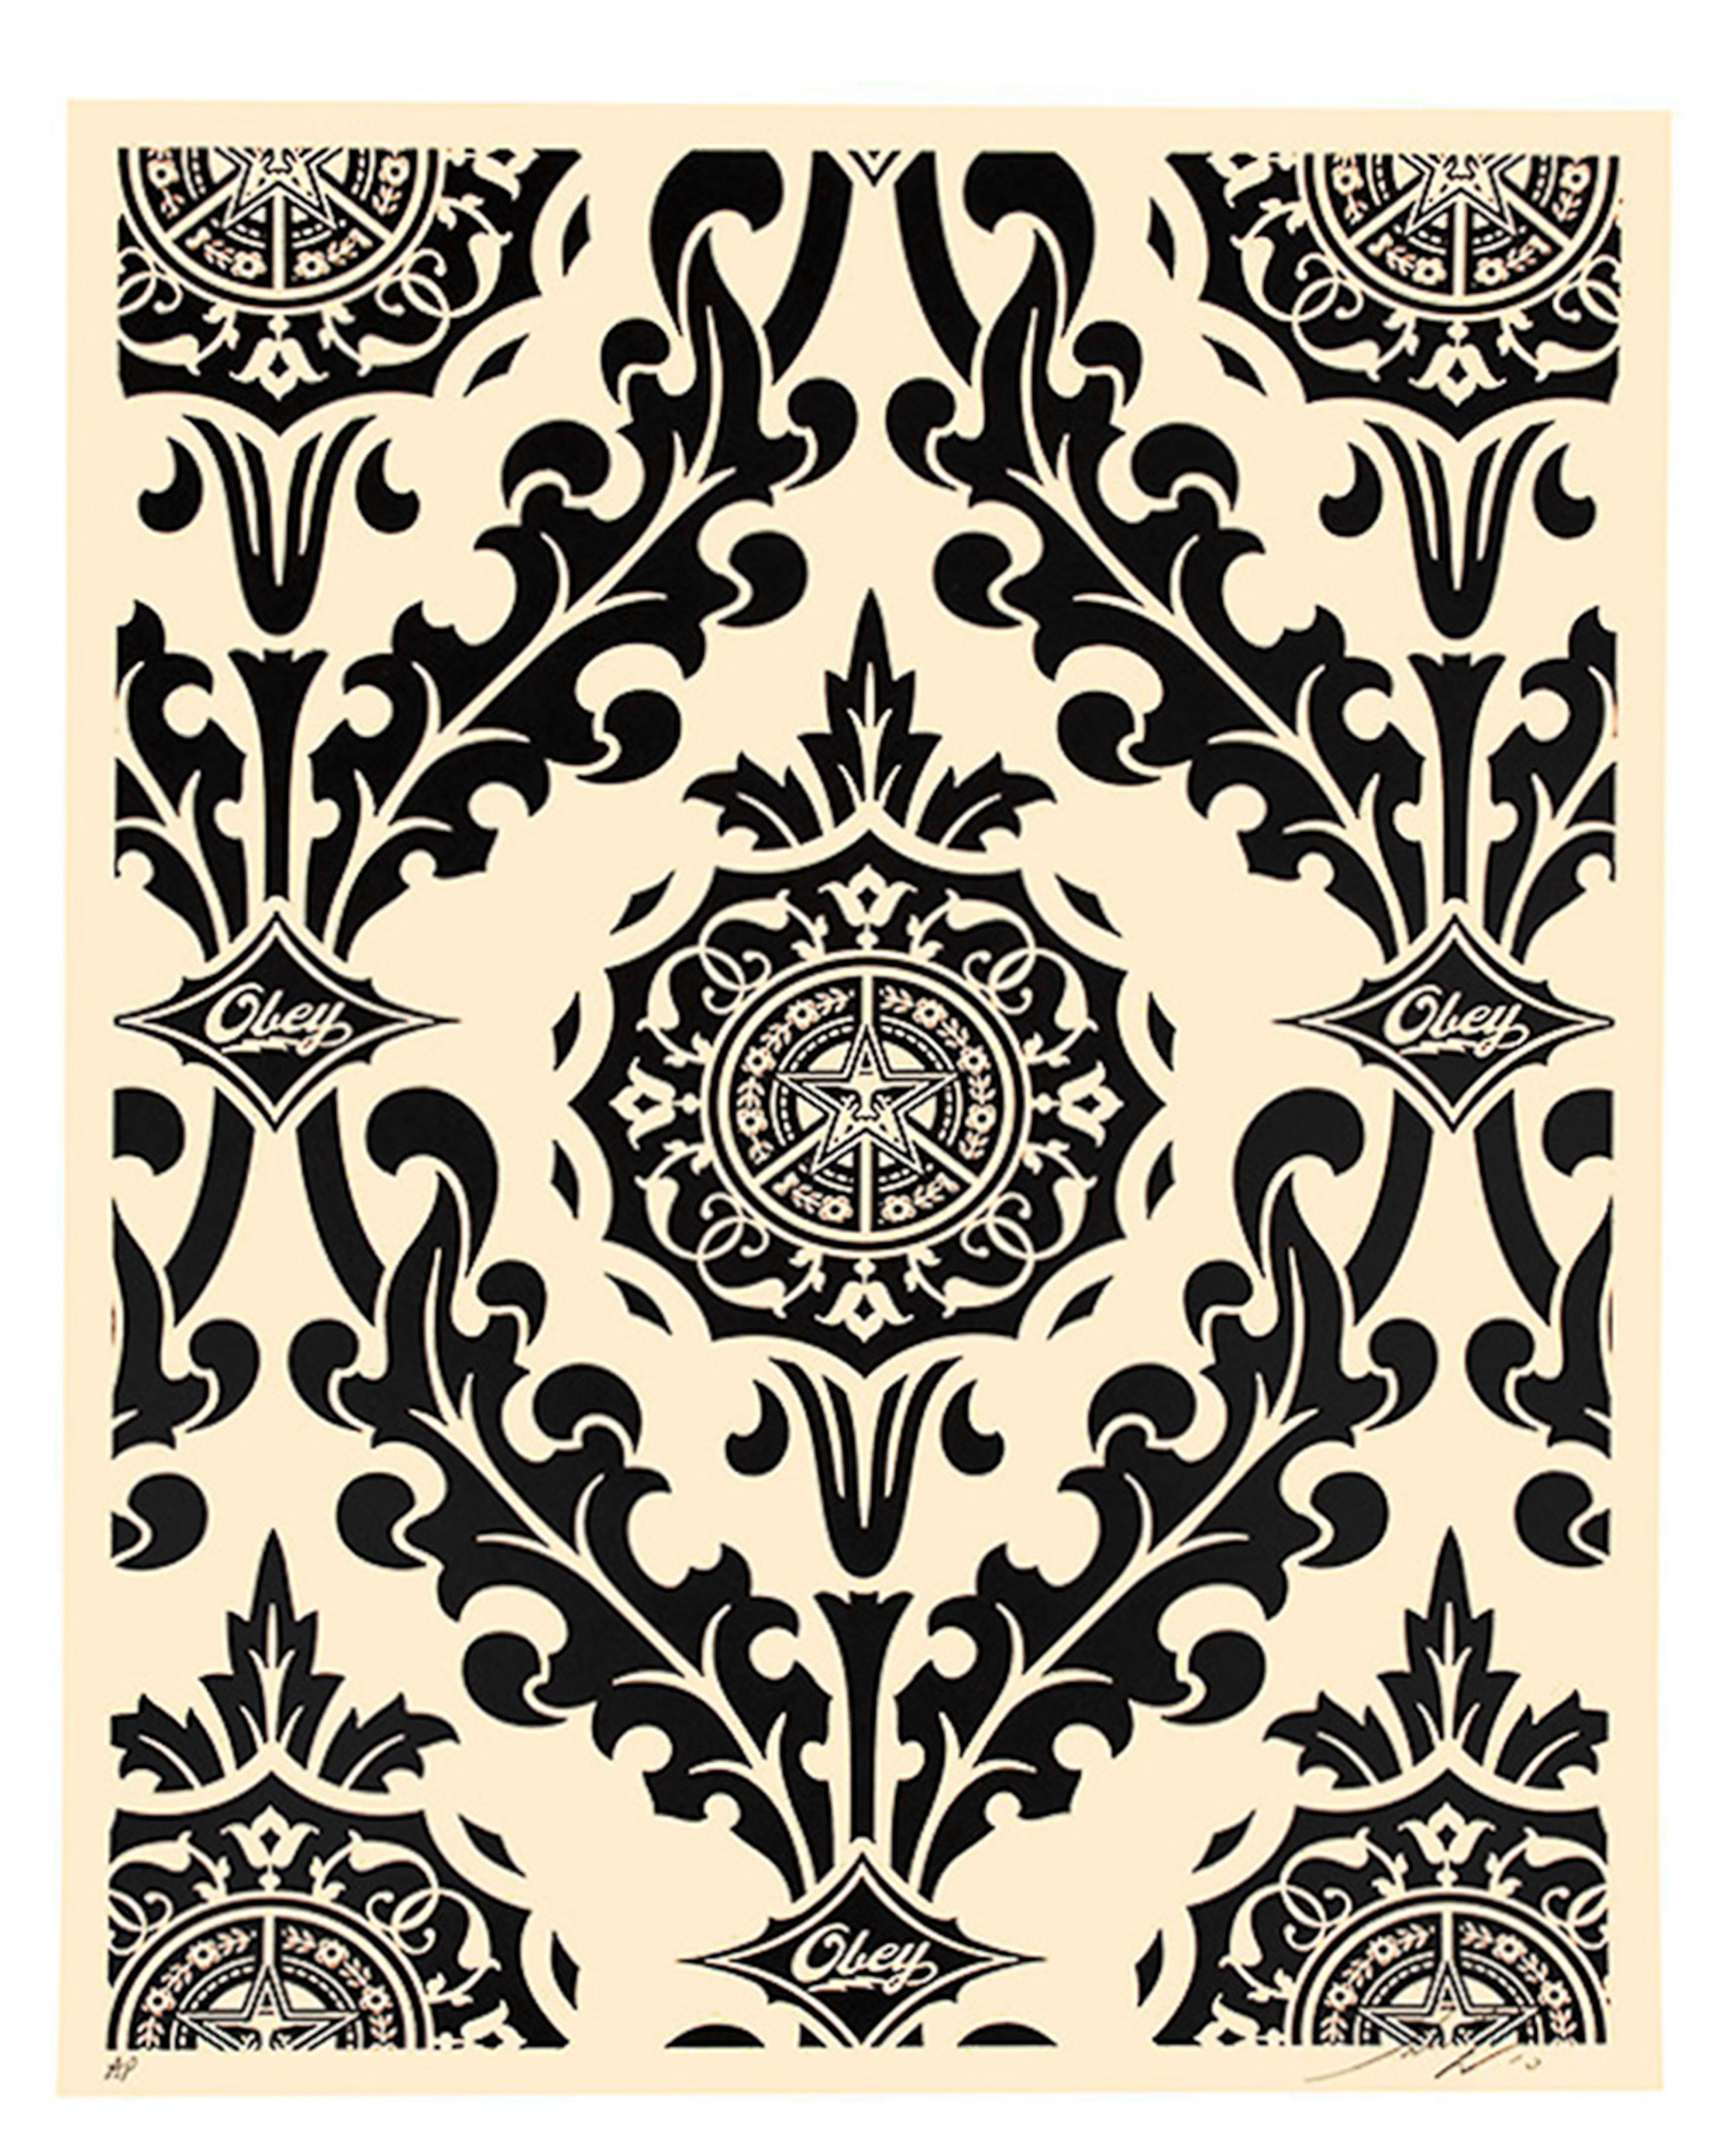 Hand signed and marked AP (Artist Proof) by Shepard Fairey.
Rare Limited edition Artist Proof (Regular edition is only 85).
Hand pulled screen print on Cream Speckle Tone paper.
Cream and Black color version.
Published by Obey Giant in March